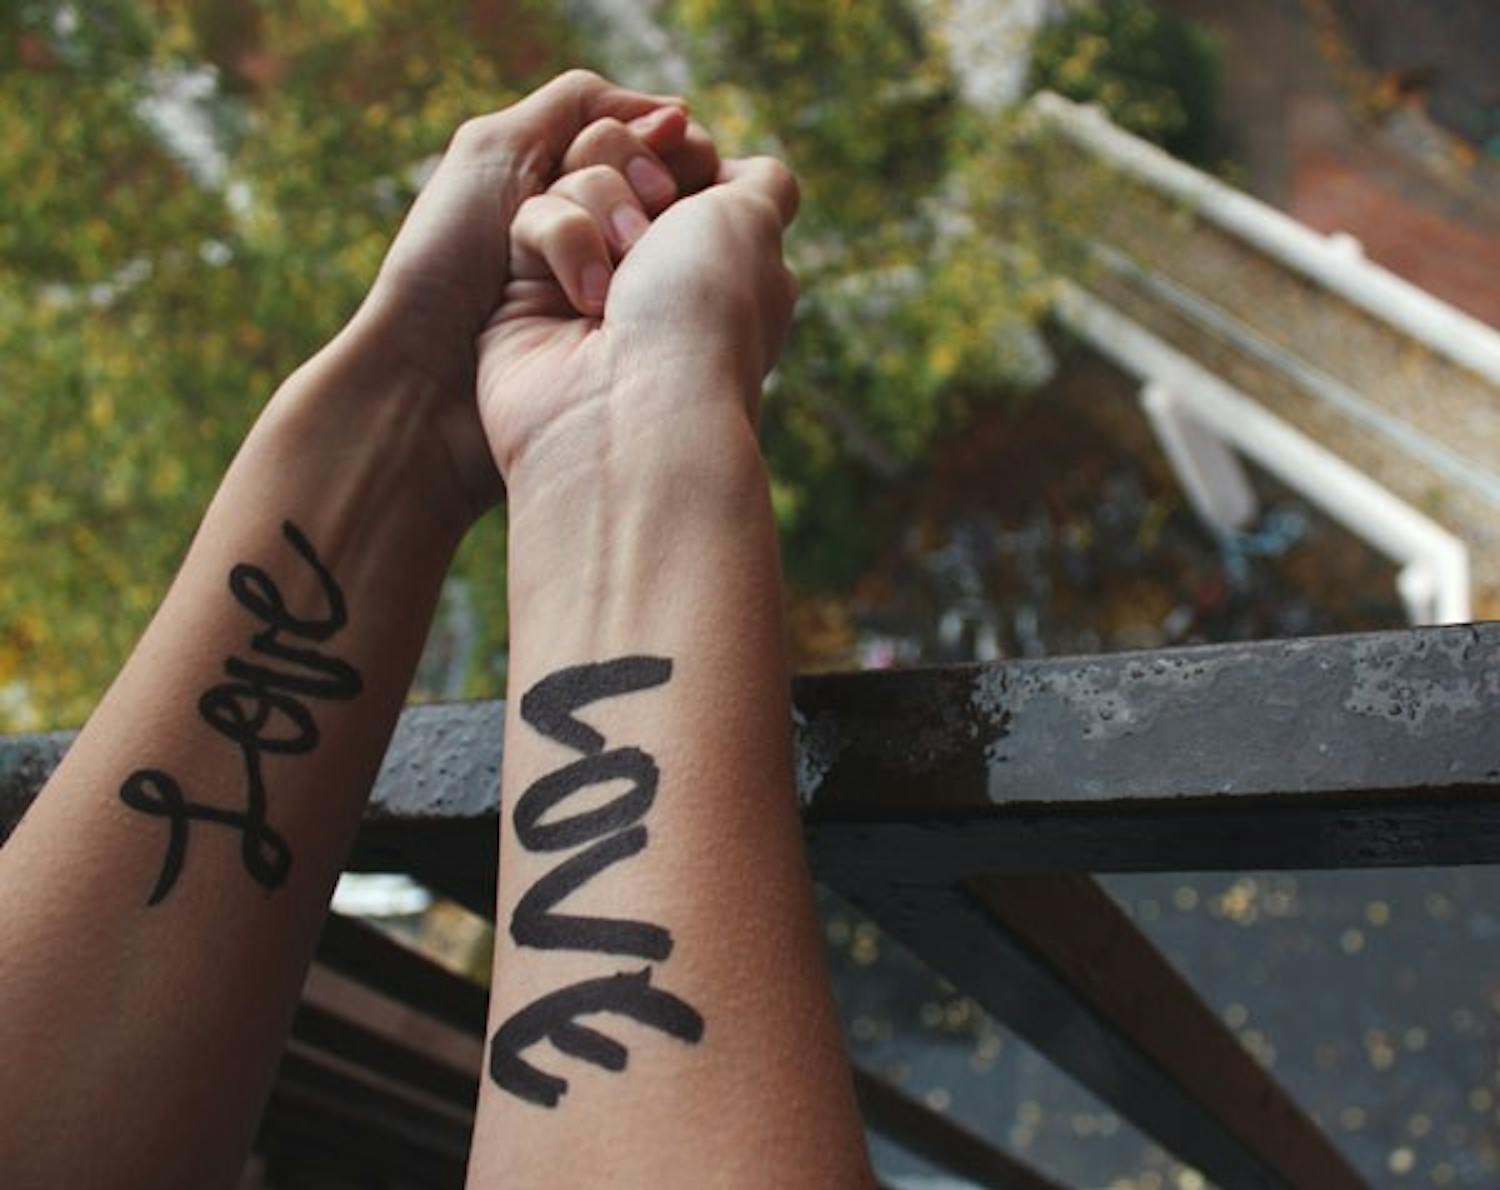 Millions of people will have the word “love” written on their forearms in permanent marker today.